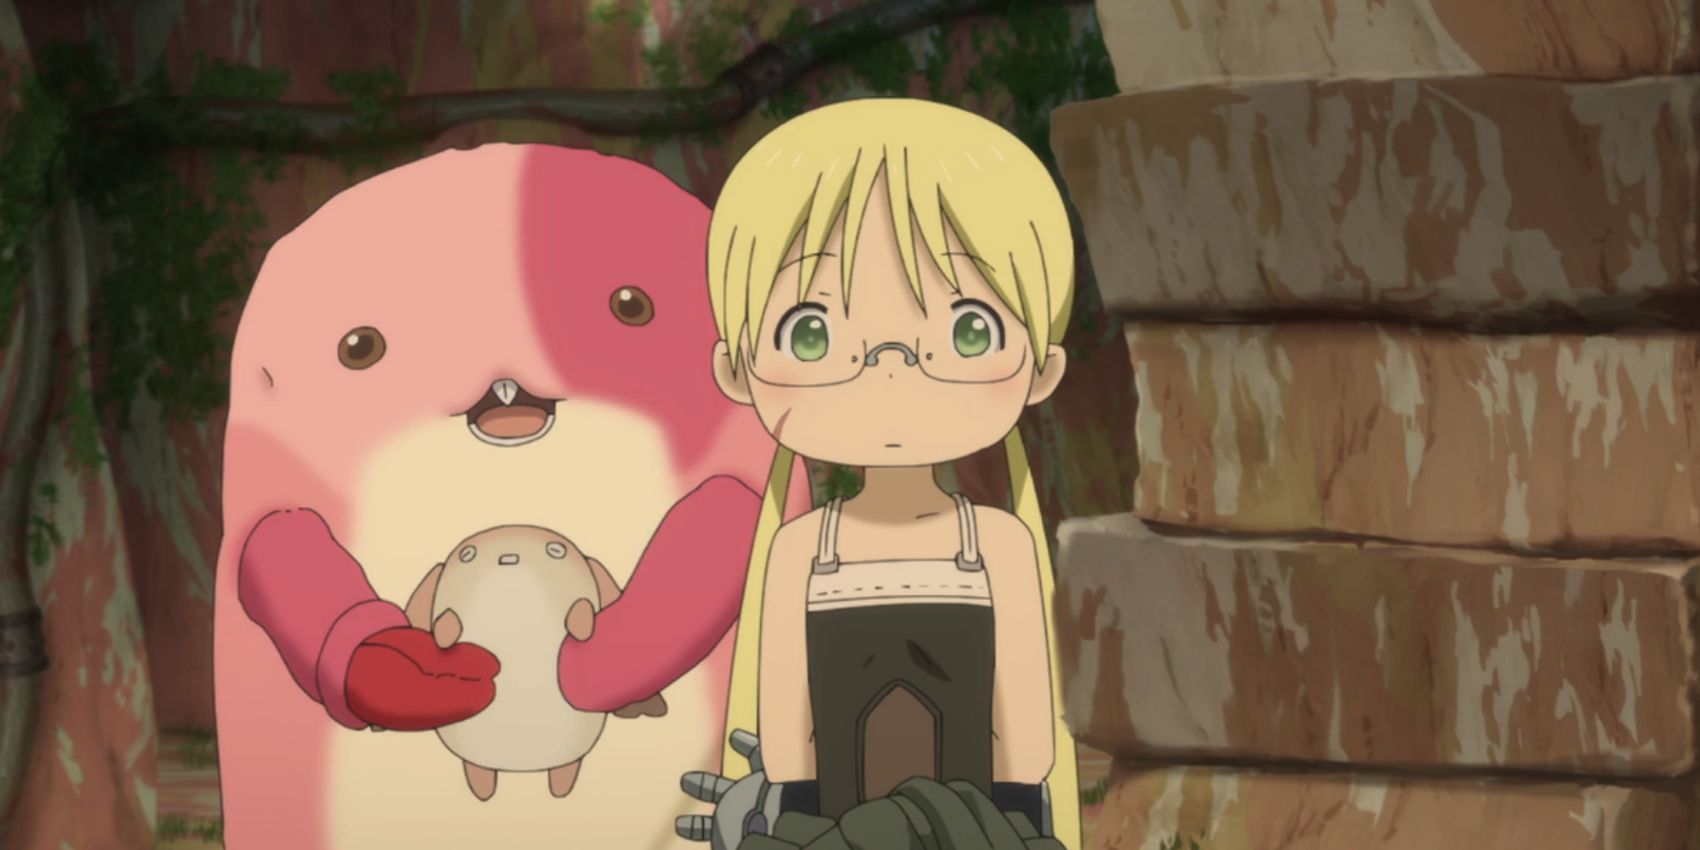 Episode 5 - Made in Abyss: The Golden City of the Scorching Sun